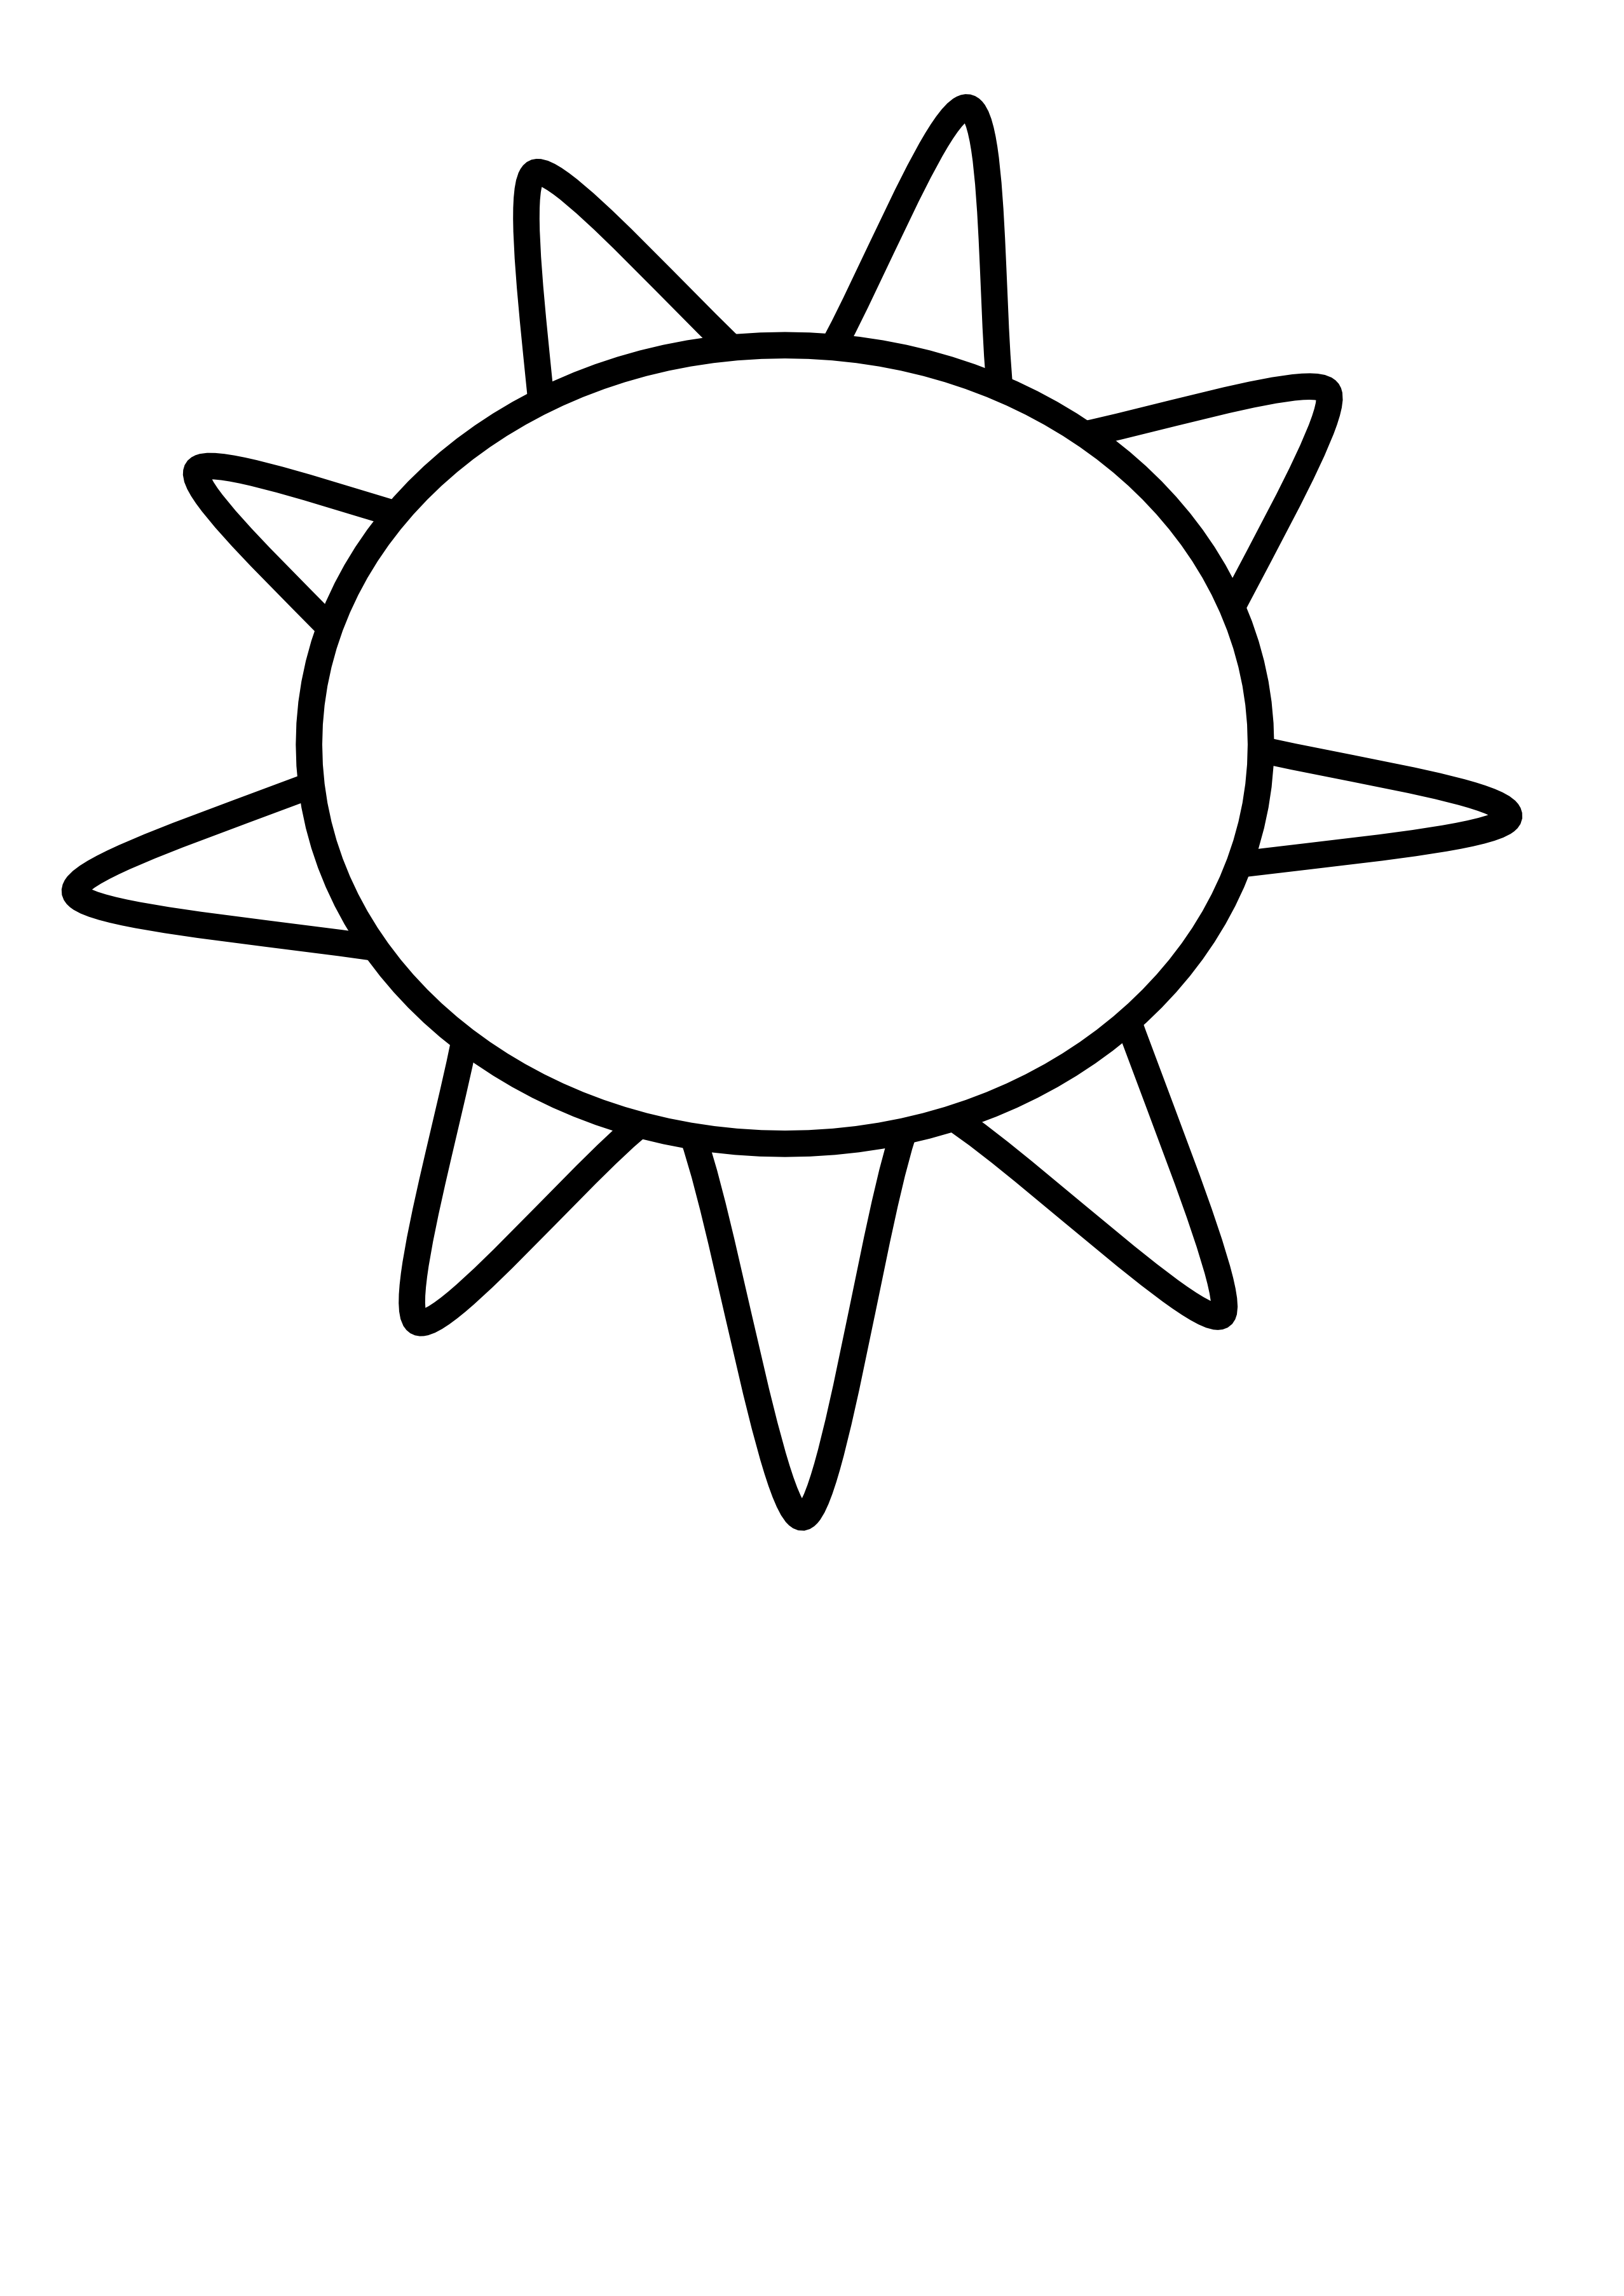 Free Black And White Sun Clipart, Download Free Clip Art.